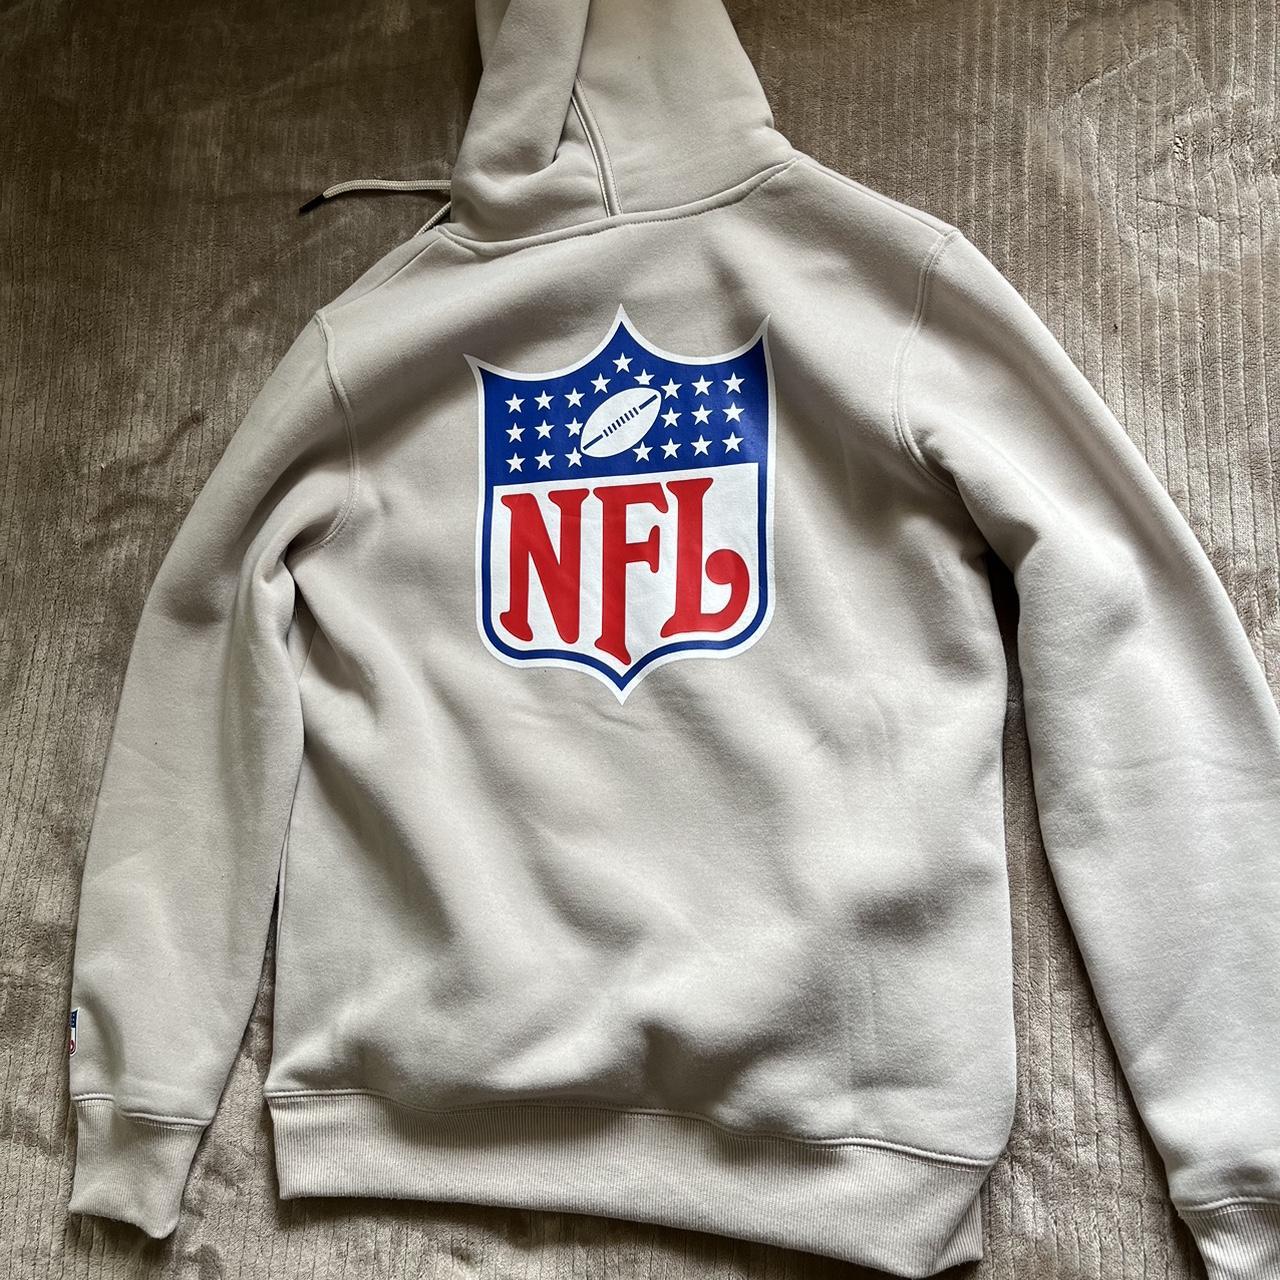 Nfl hoodie wore once never wore it again size small. - Depop